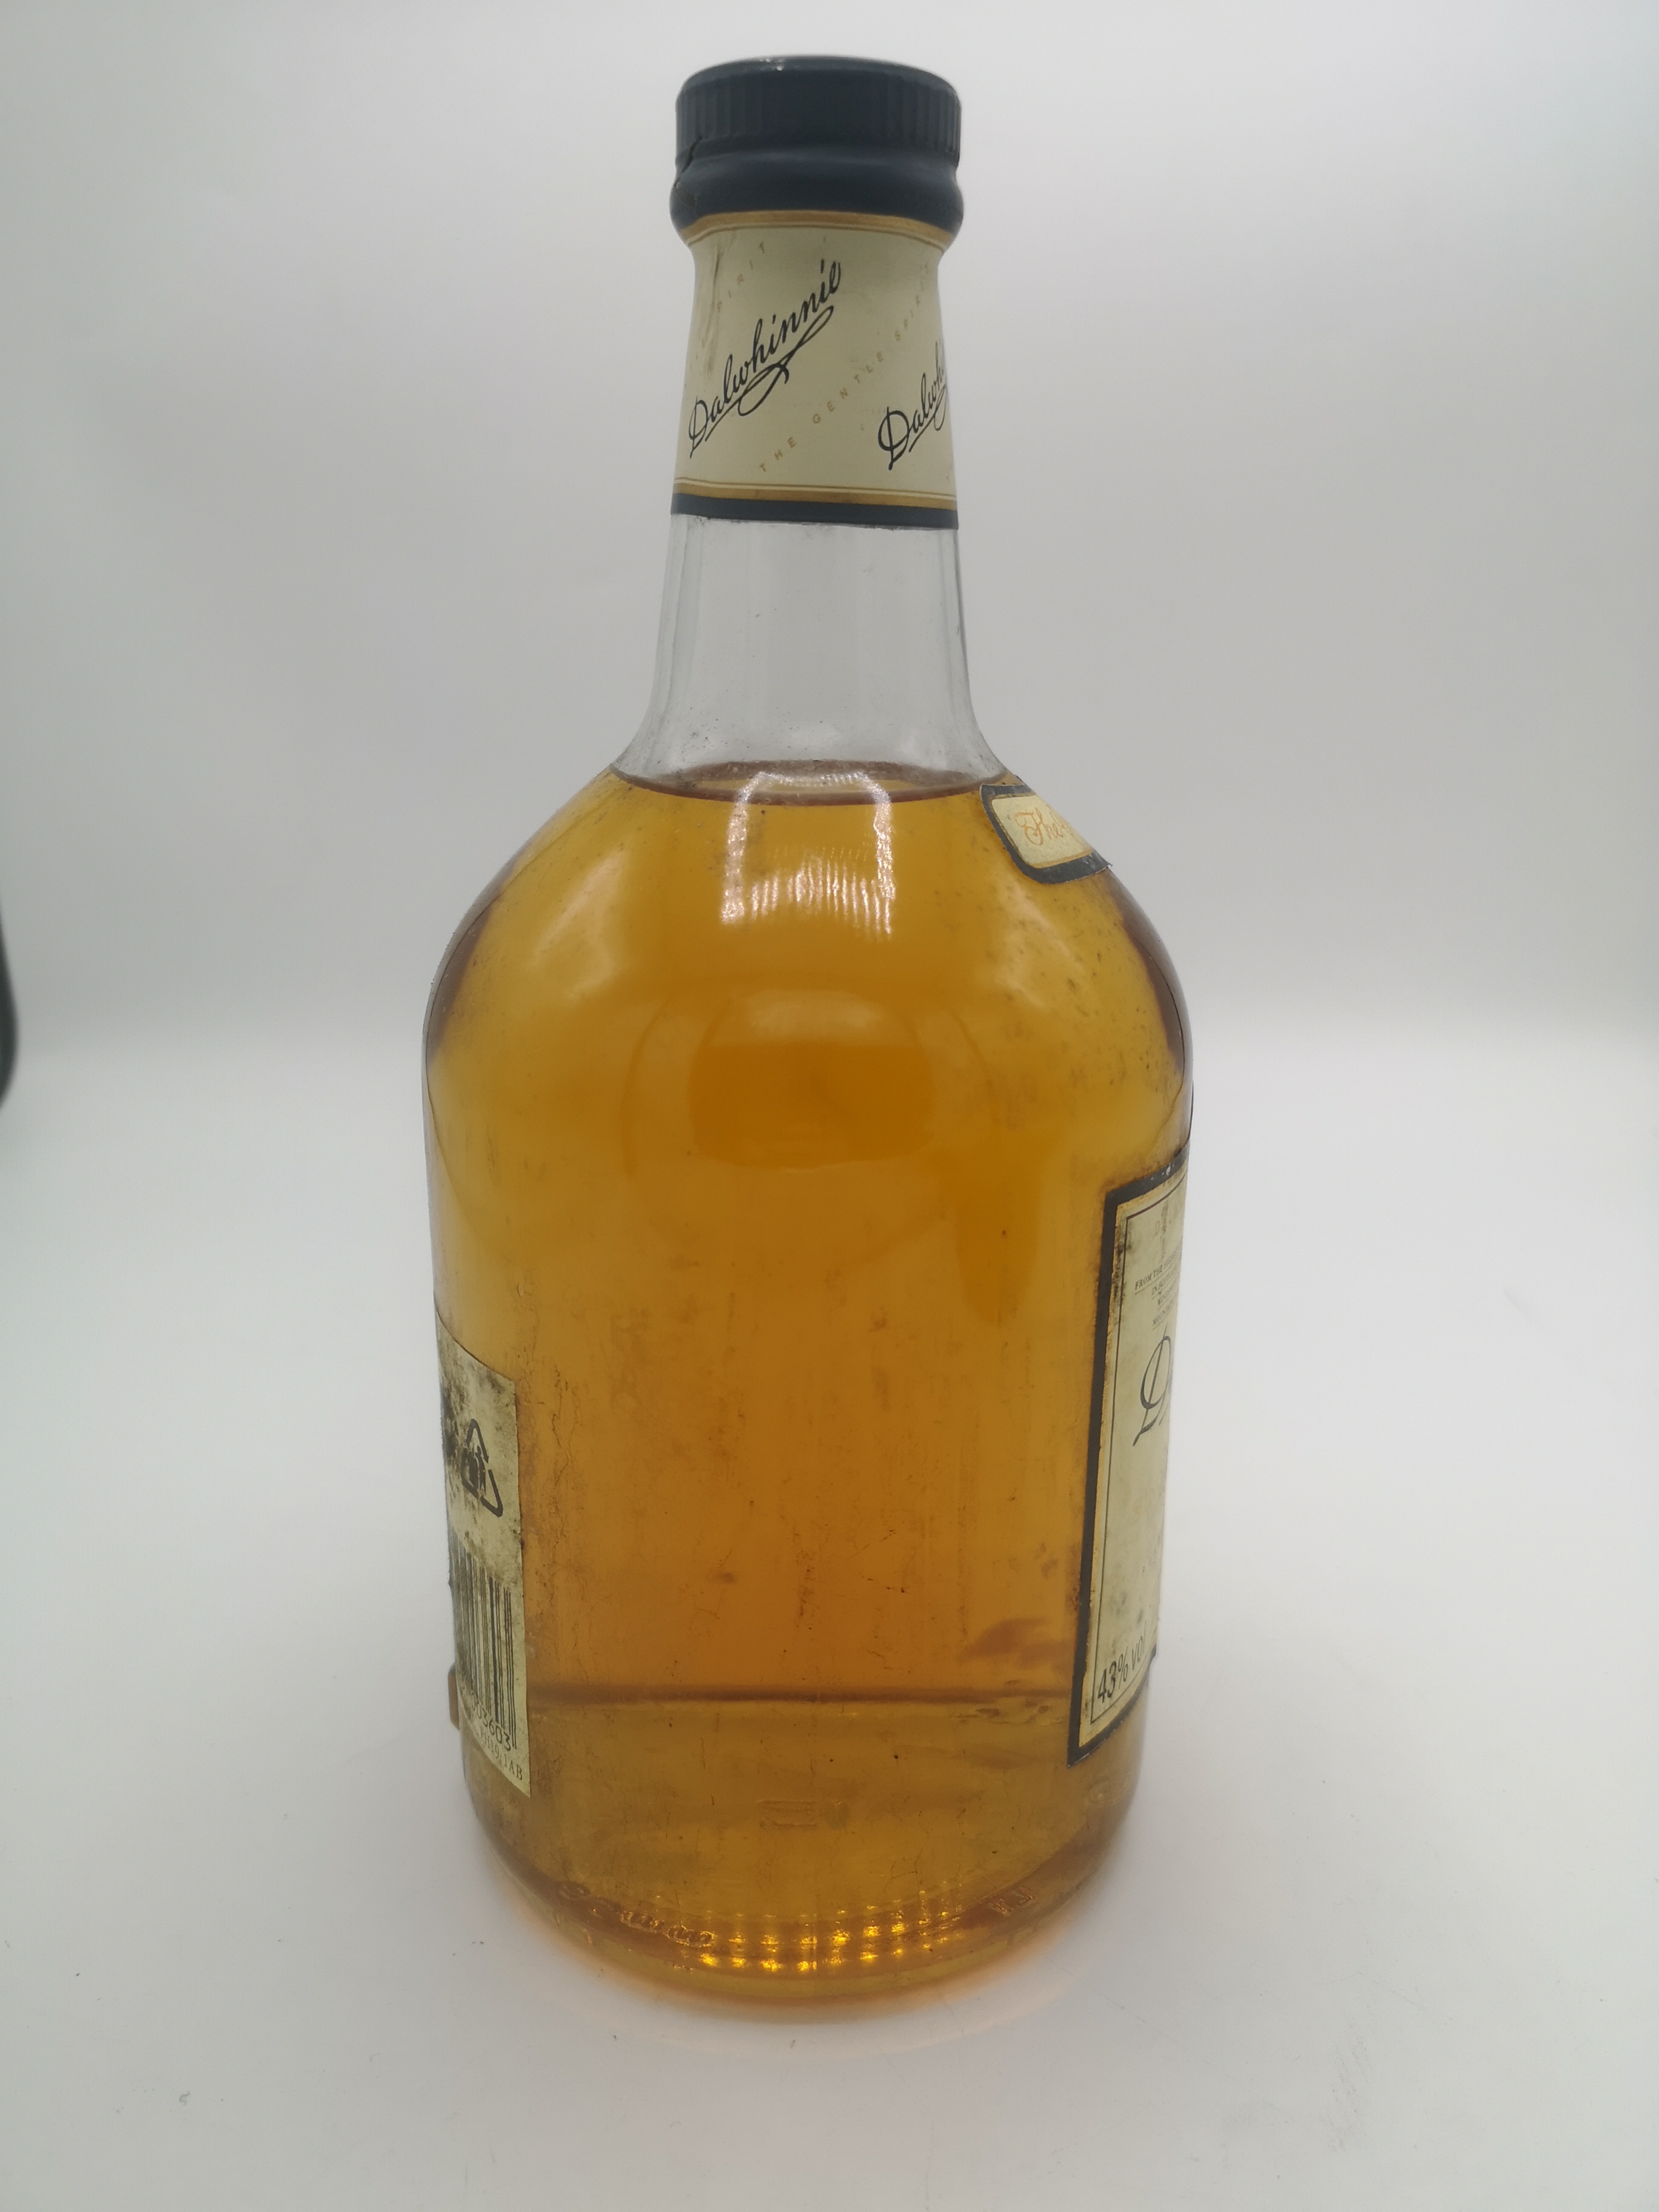 1l bottle of Dalwhinnie Scotch whisky - Image 4 of 8